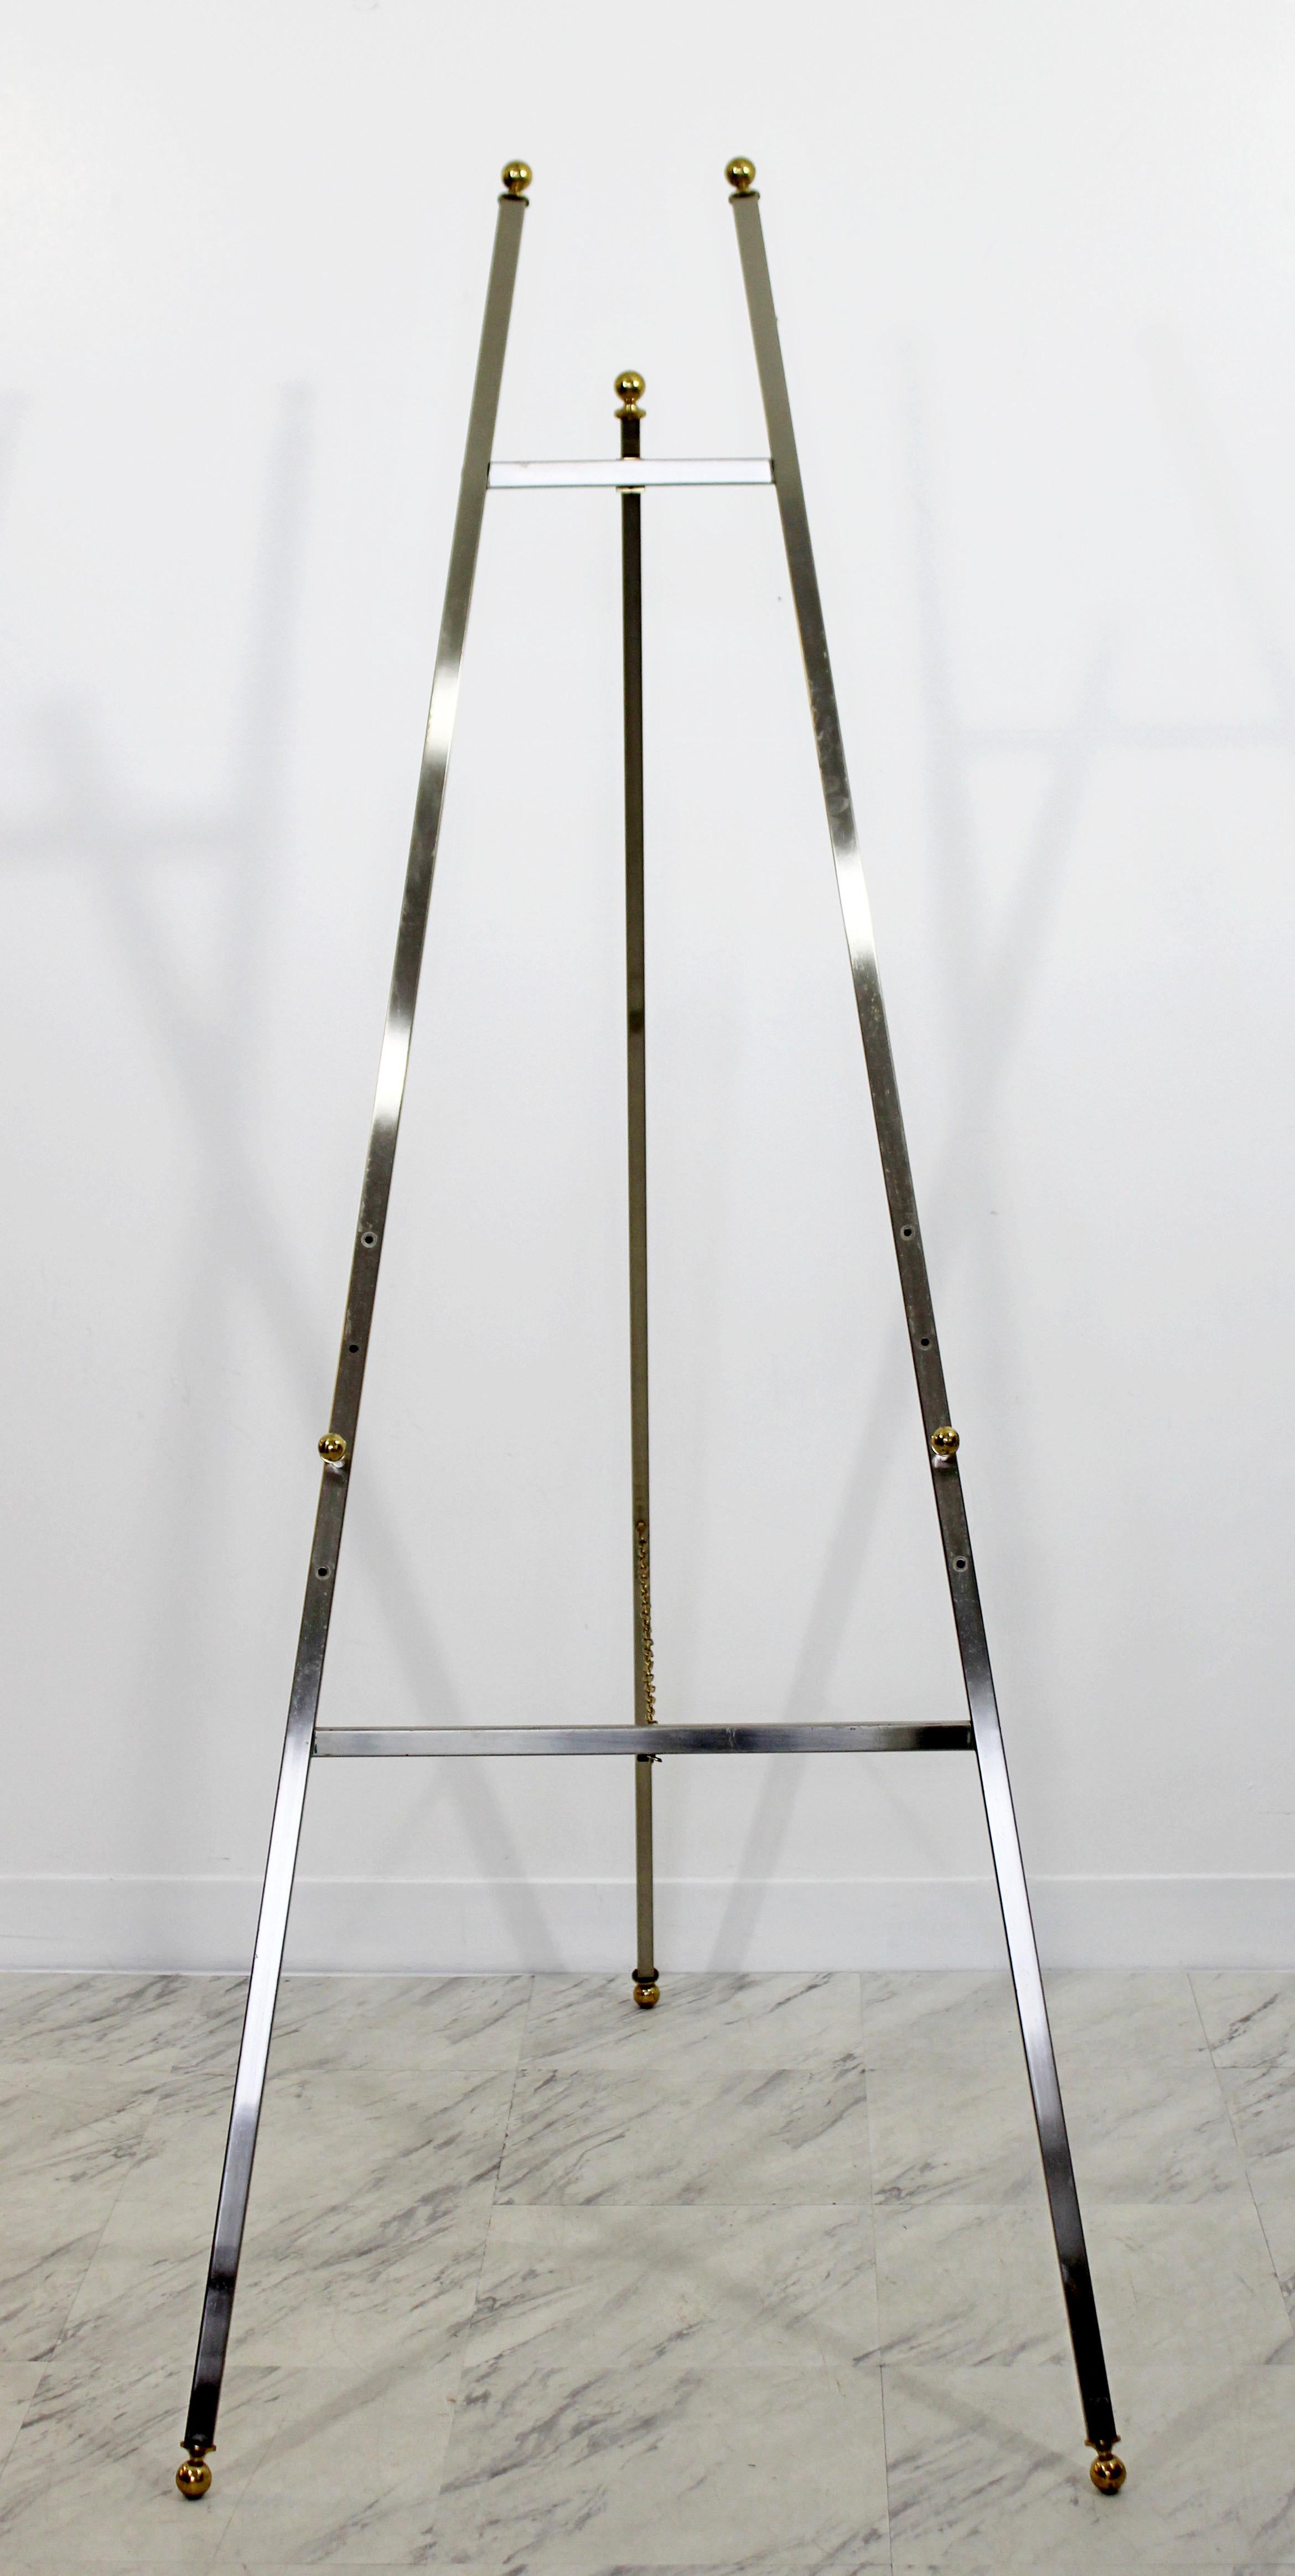 For your consideration is a tall, chrome and brass accented, art display easel, made in Italy, circa 1970s. In very good condition. The dimensions are 25